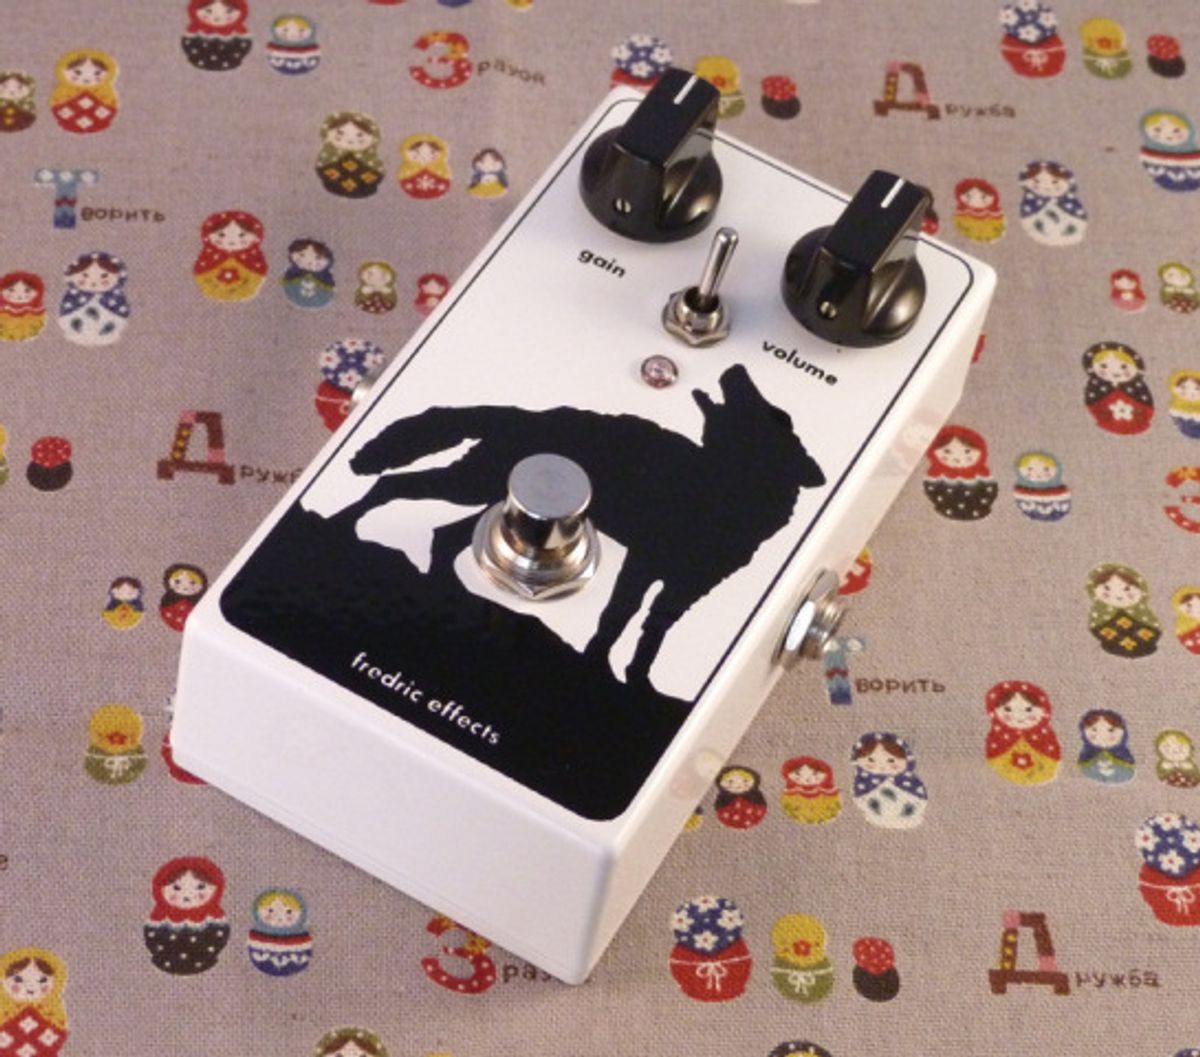 Fredric Effects Announces the Grumbly Wolf